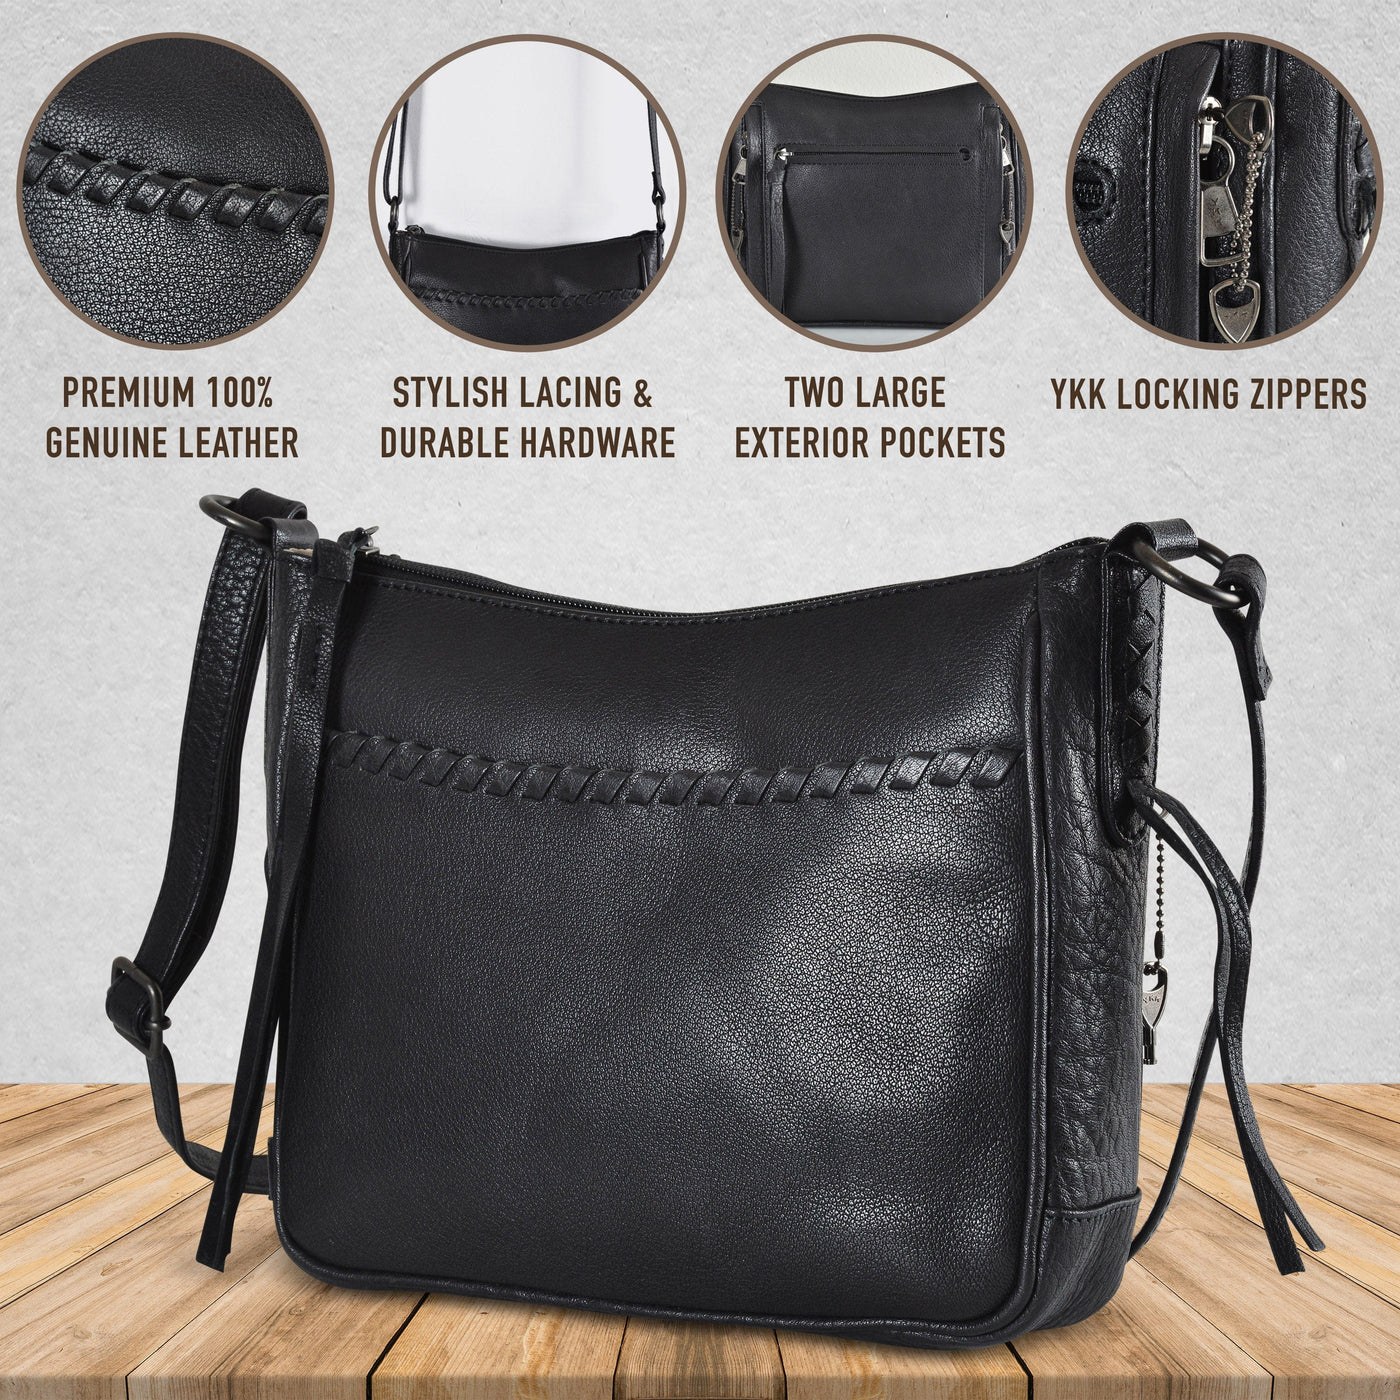 Concealed Carry Callie Leather Crossbody - YKK Locking Bag Black with Universal Holster for Pistol and Guns